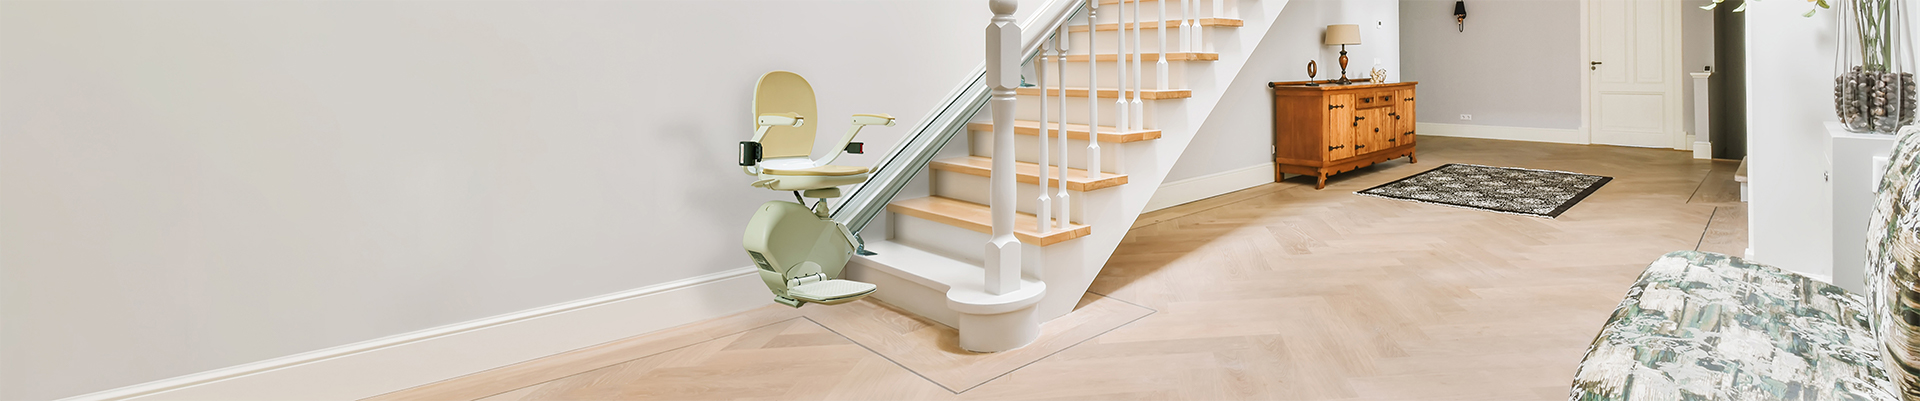 Stairlifts in a Edinburgh home